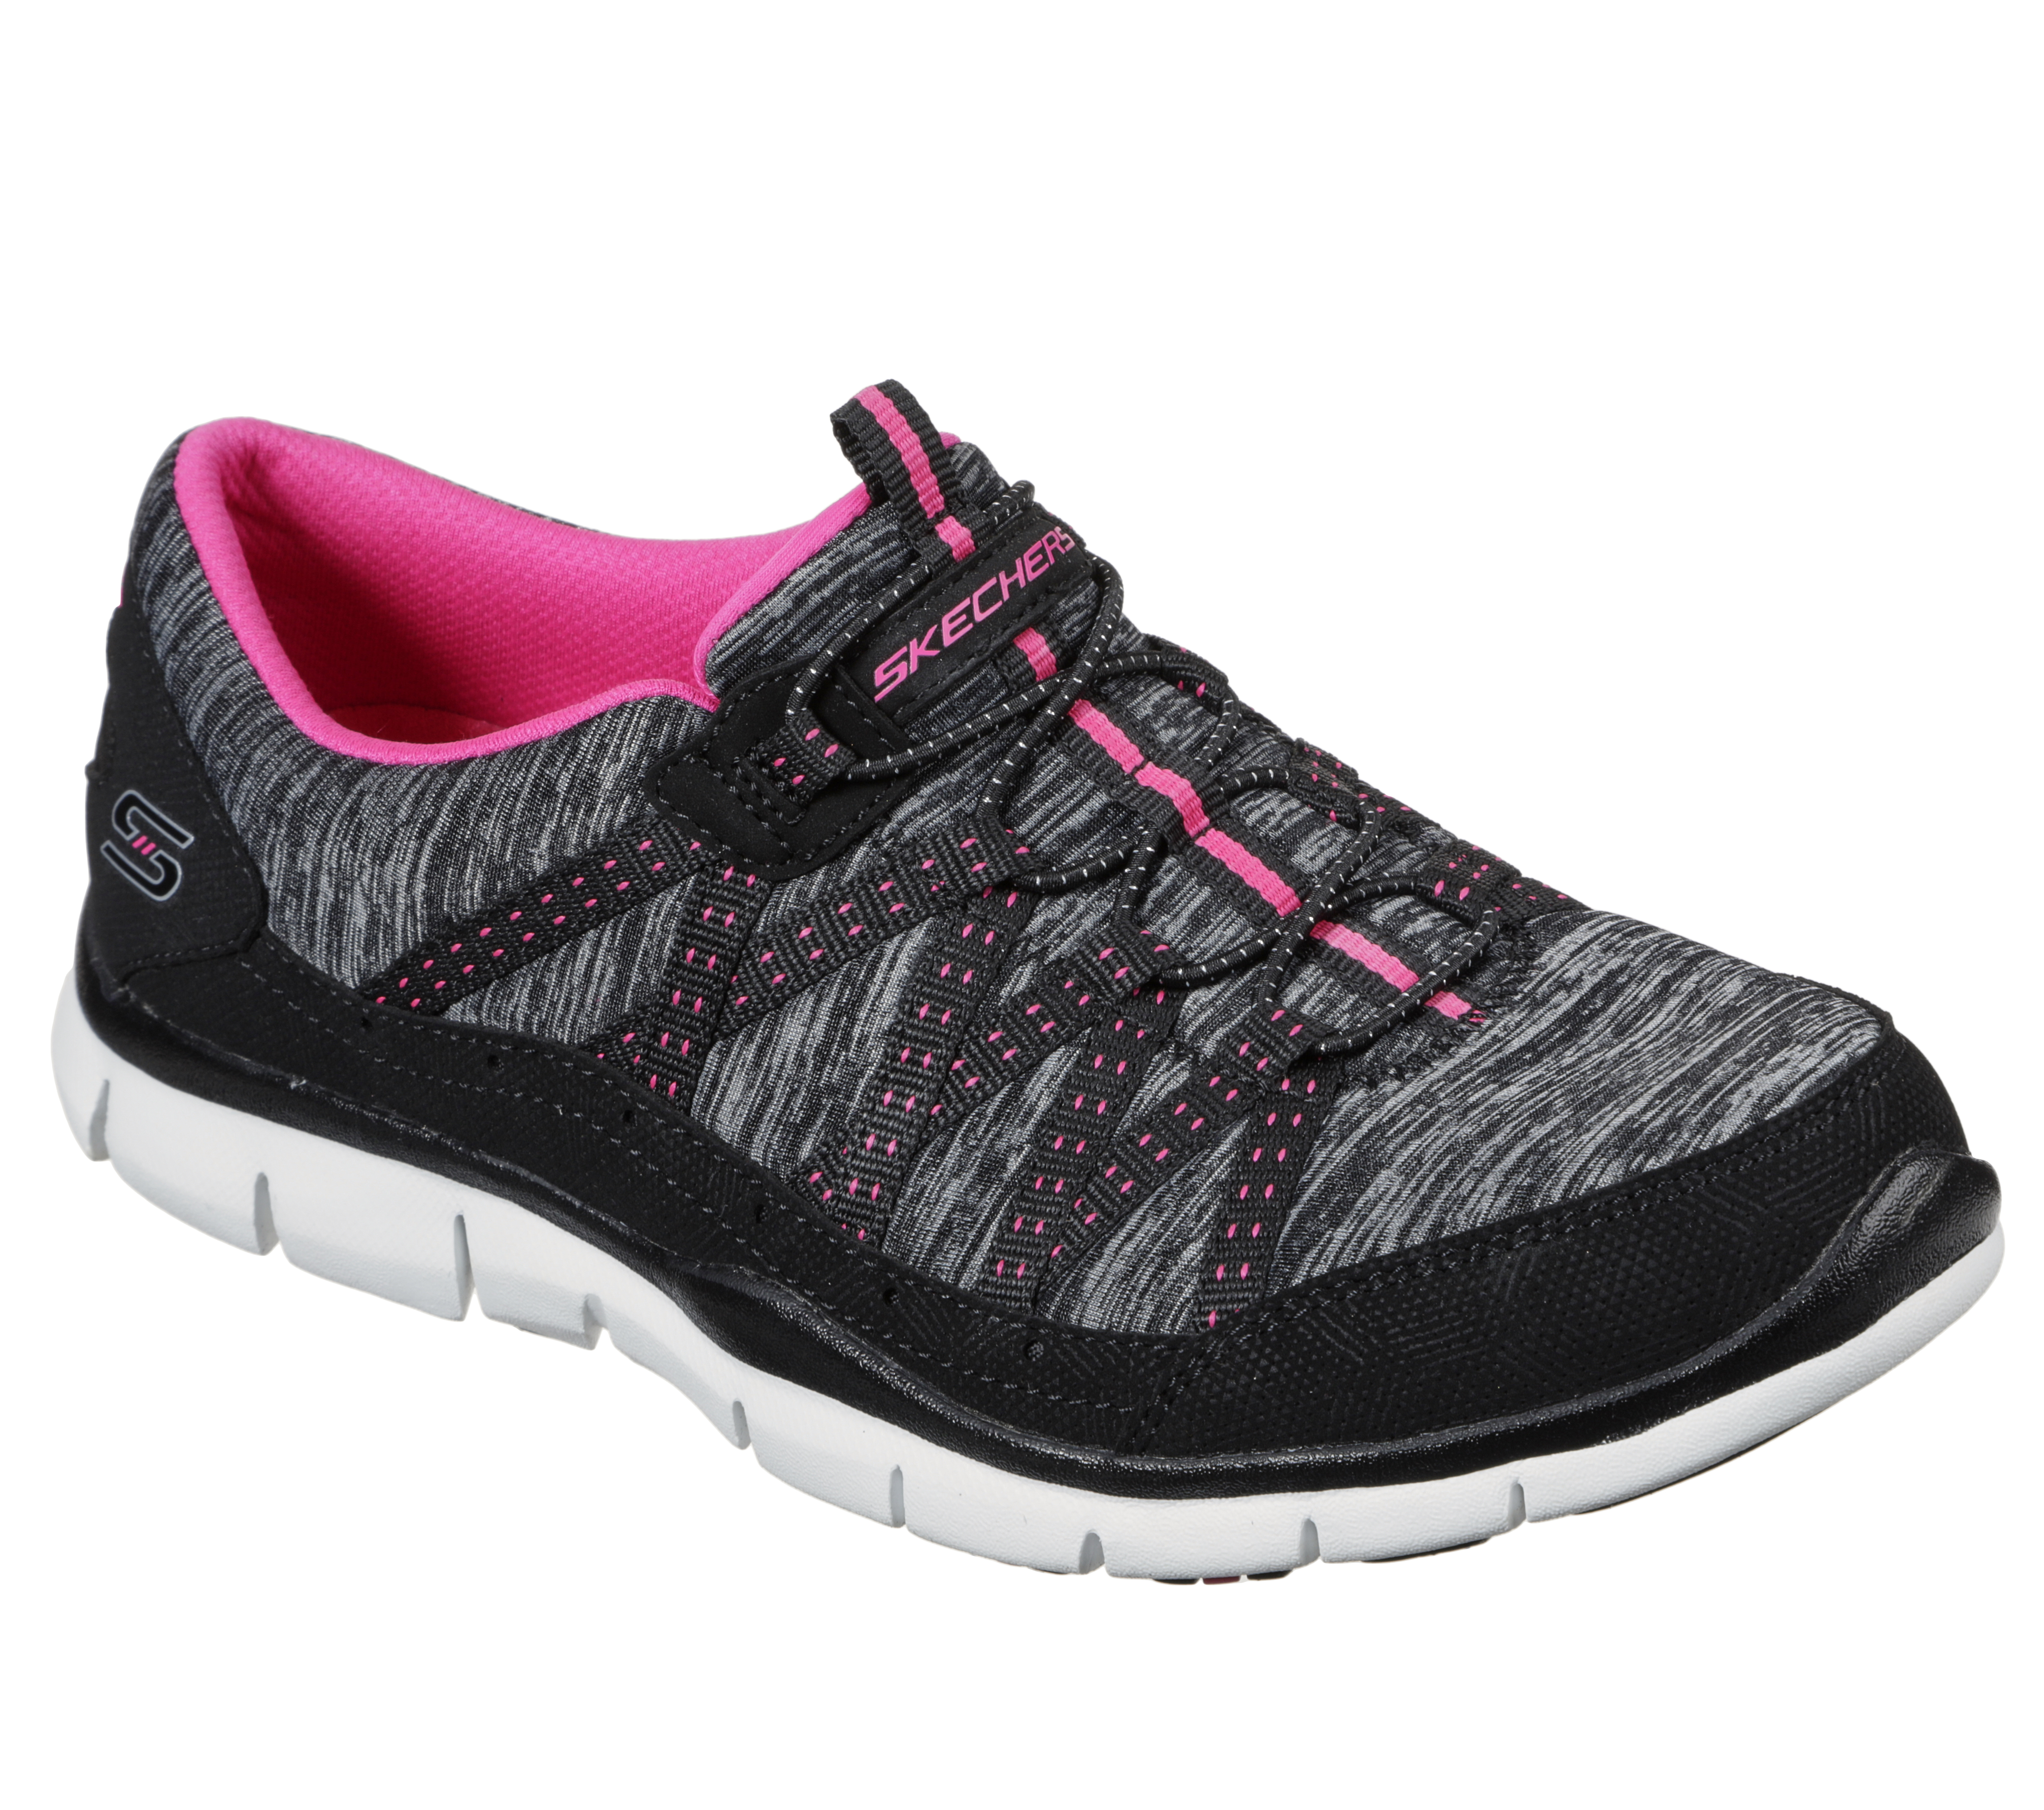 skechers cruiser lace shoes